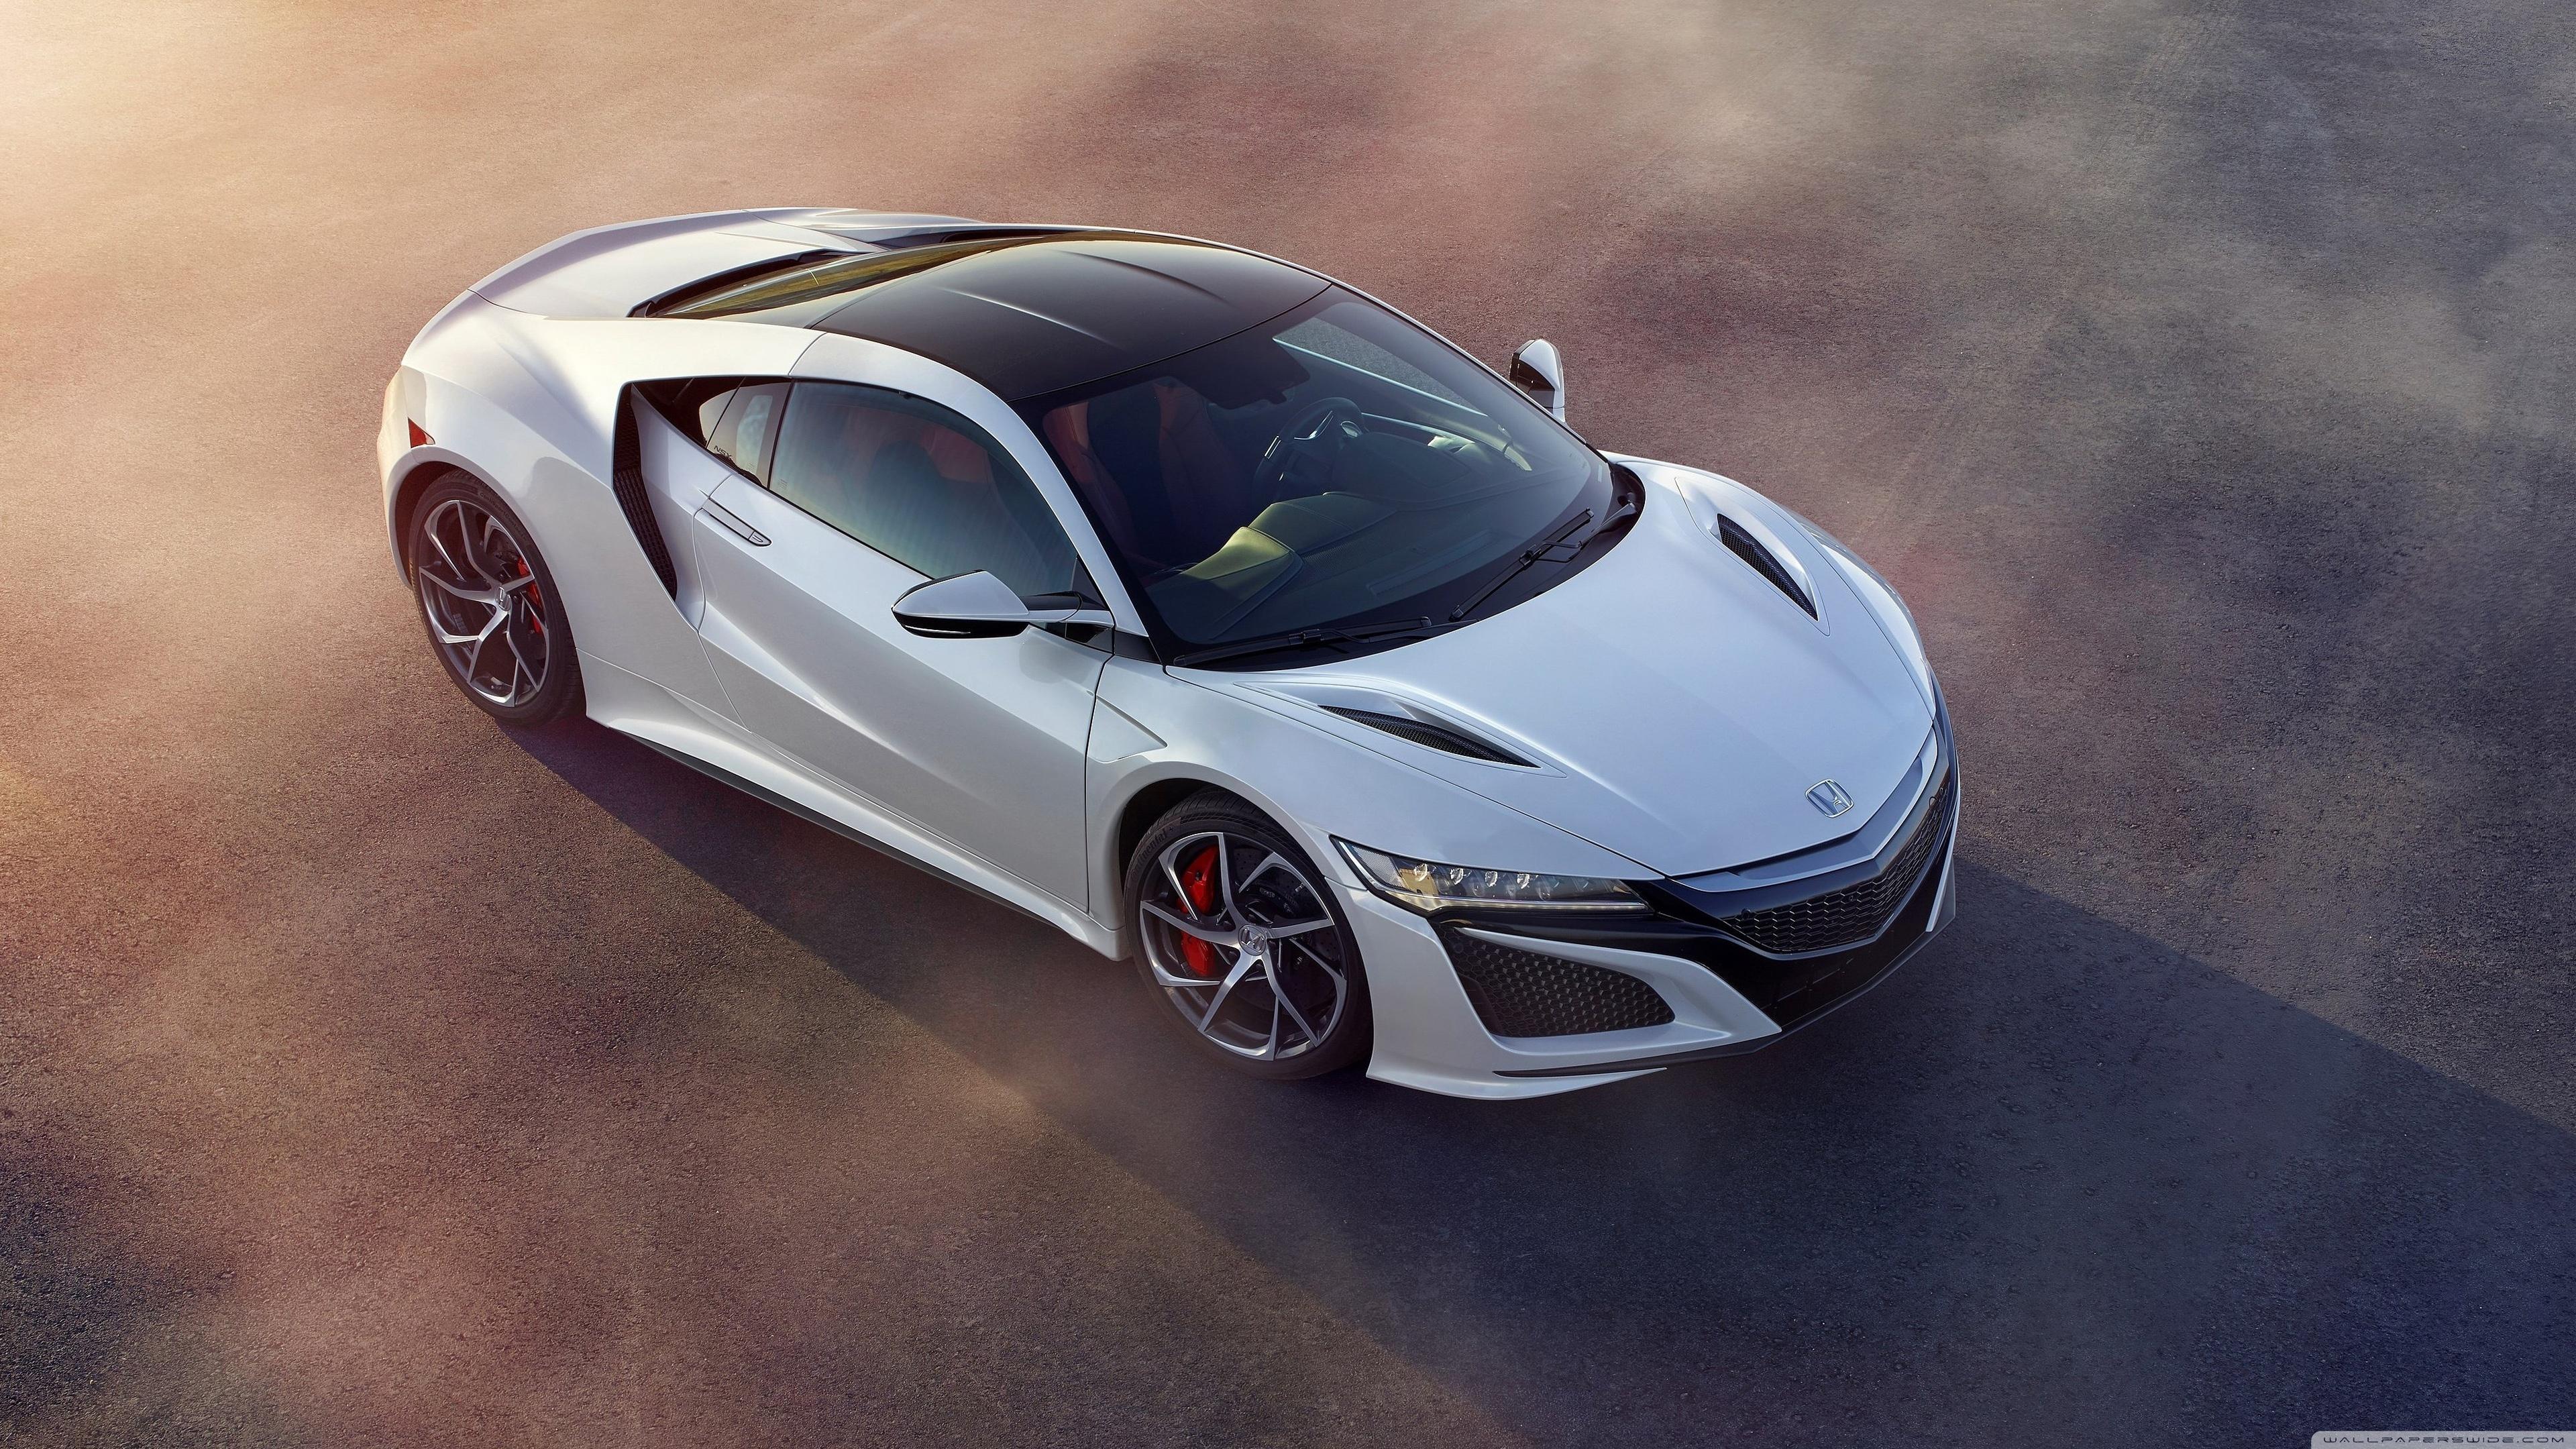 Acura Nsx Car Wallpapers Wallpaper Cave